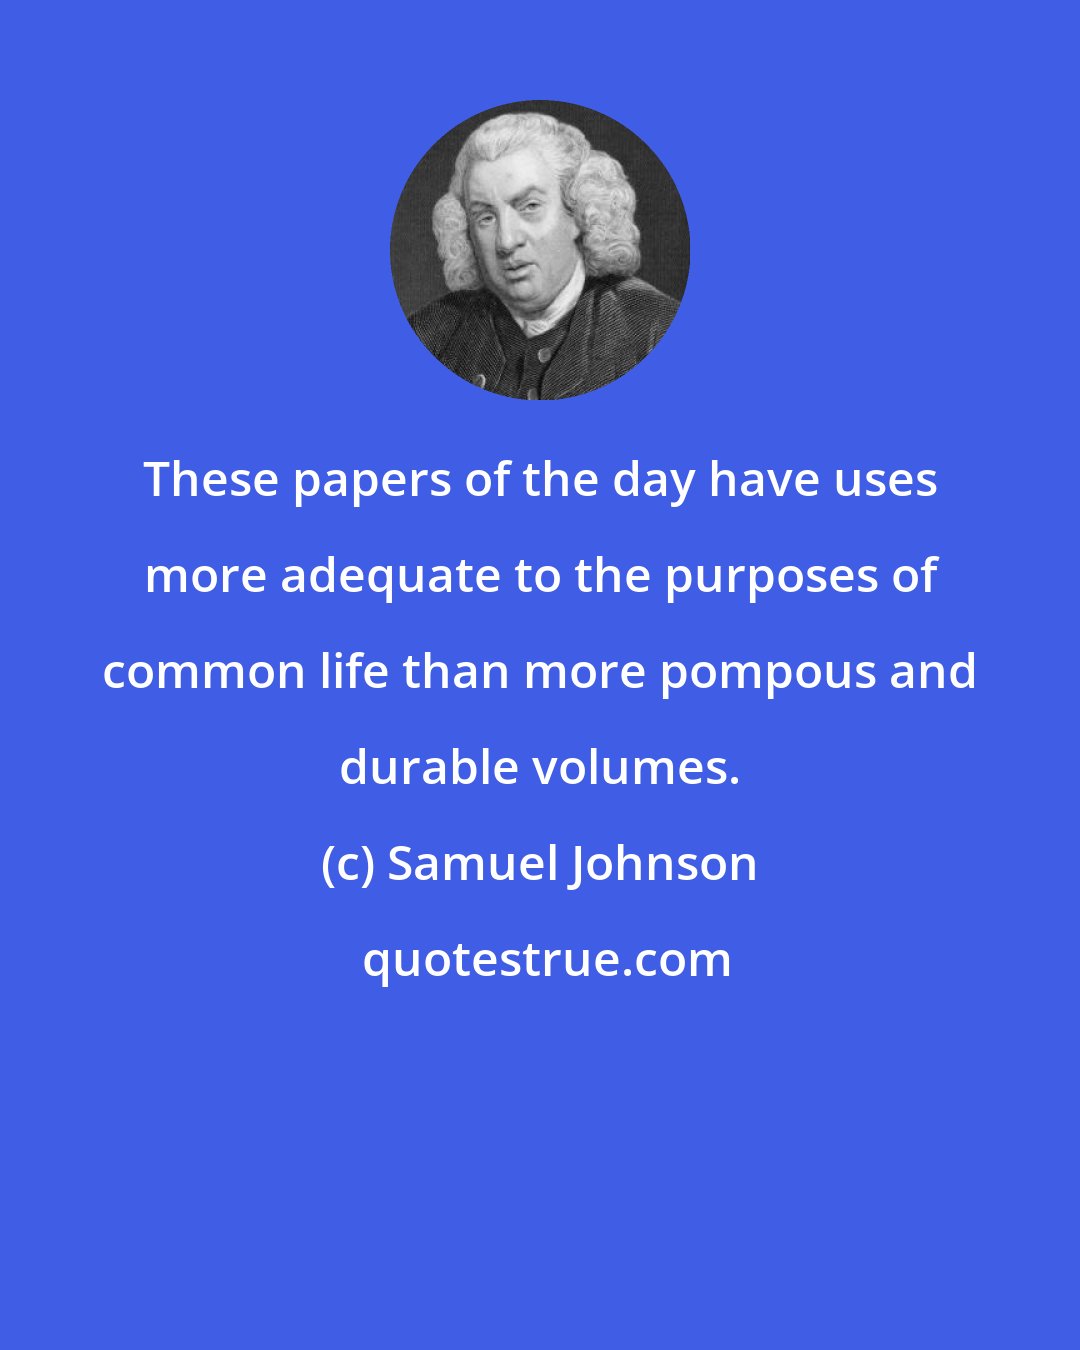 Samuel Johnson: These papers of the day have uses more adequate to the purposes of common life than more pompous and durable volumes.